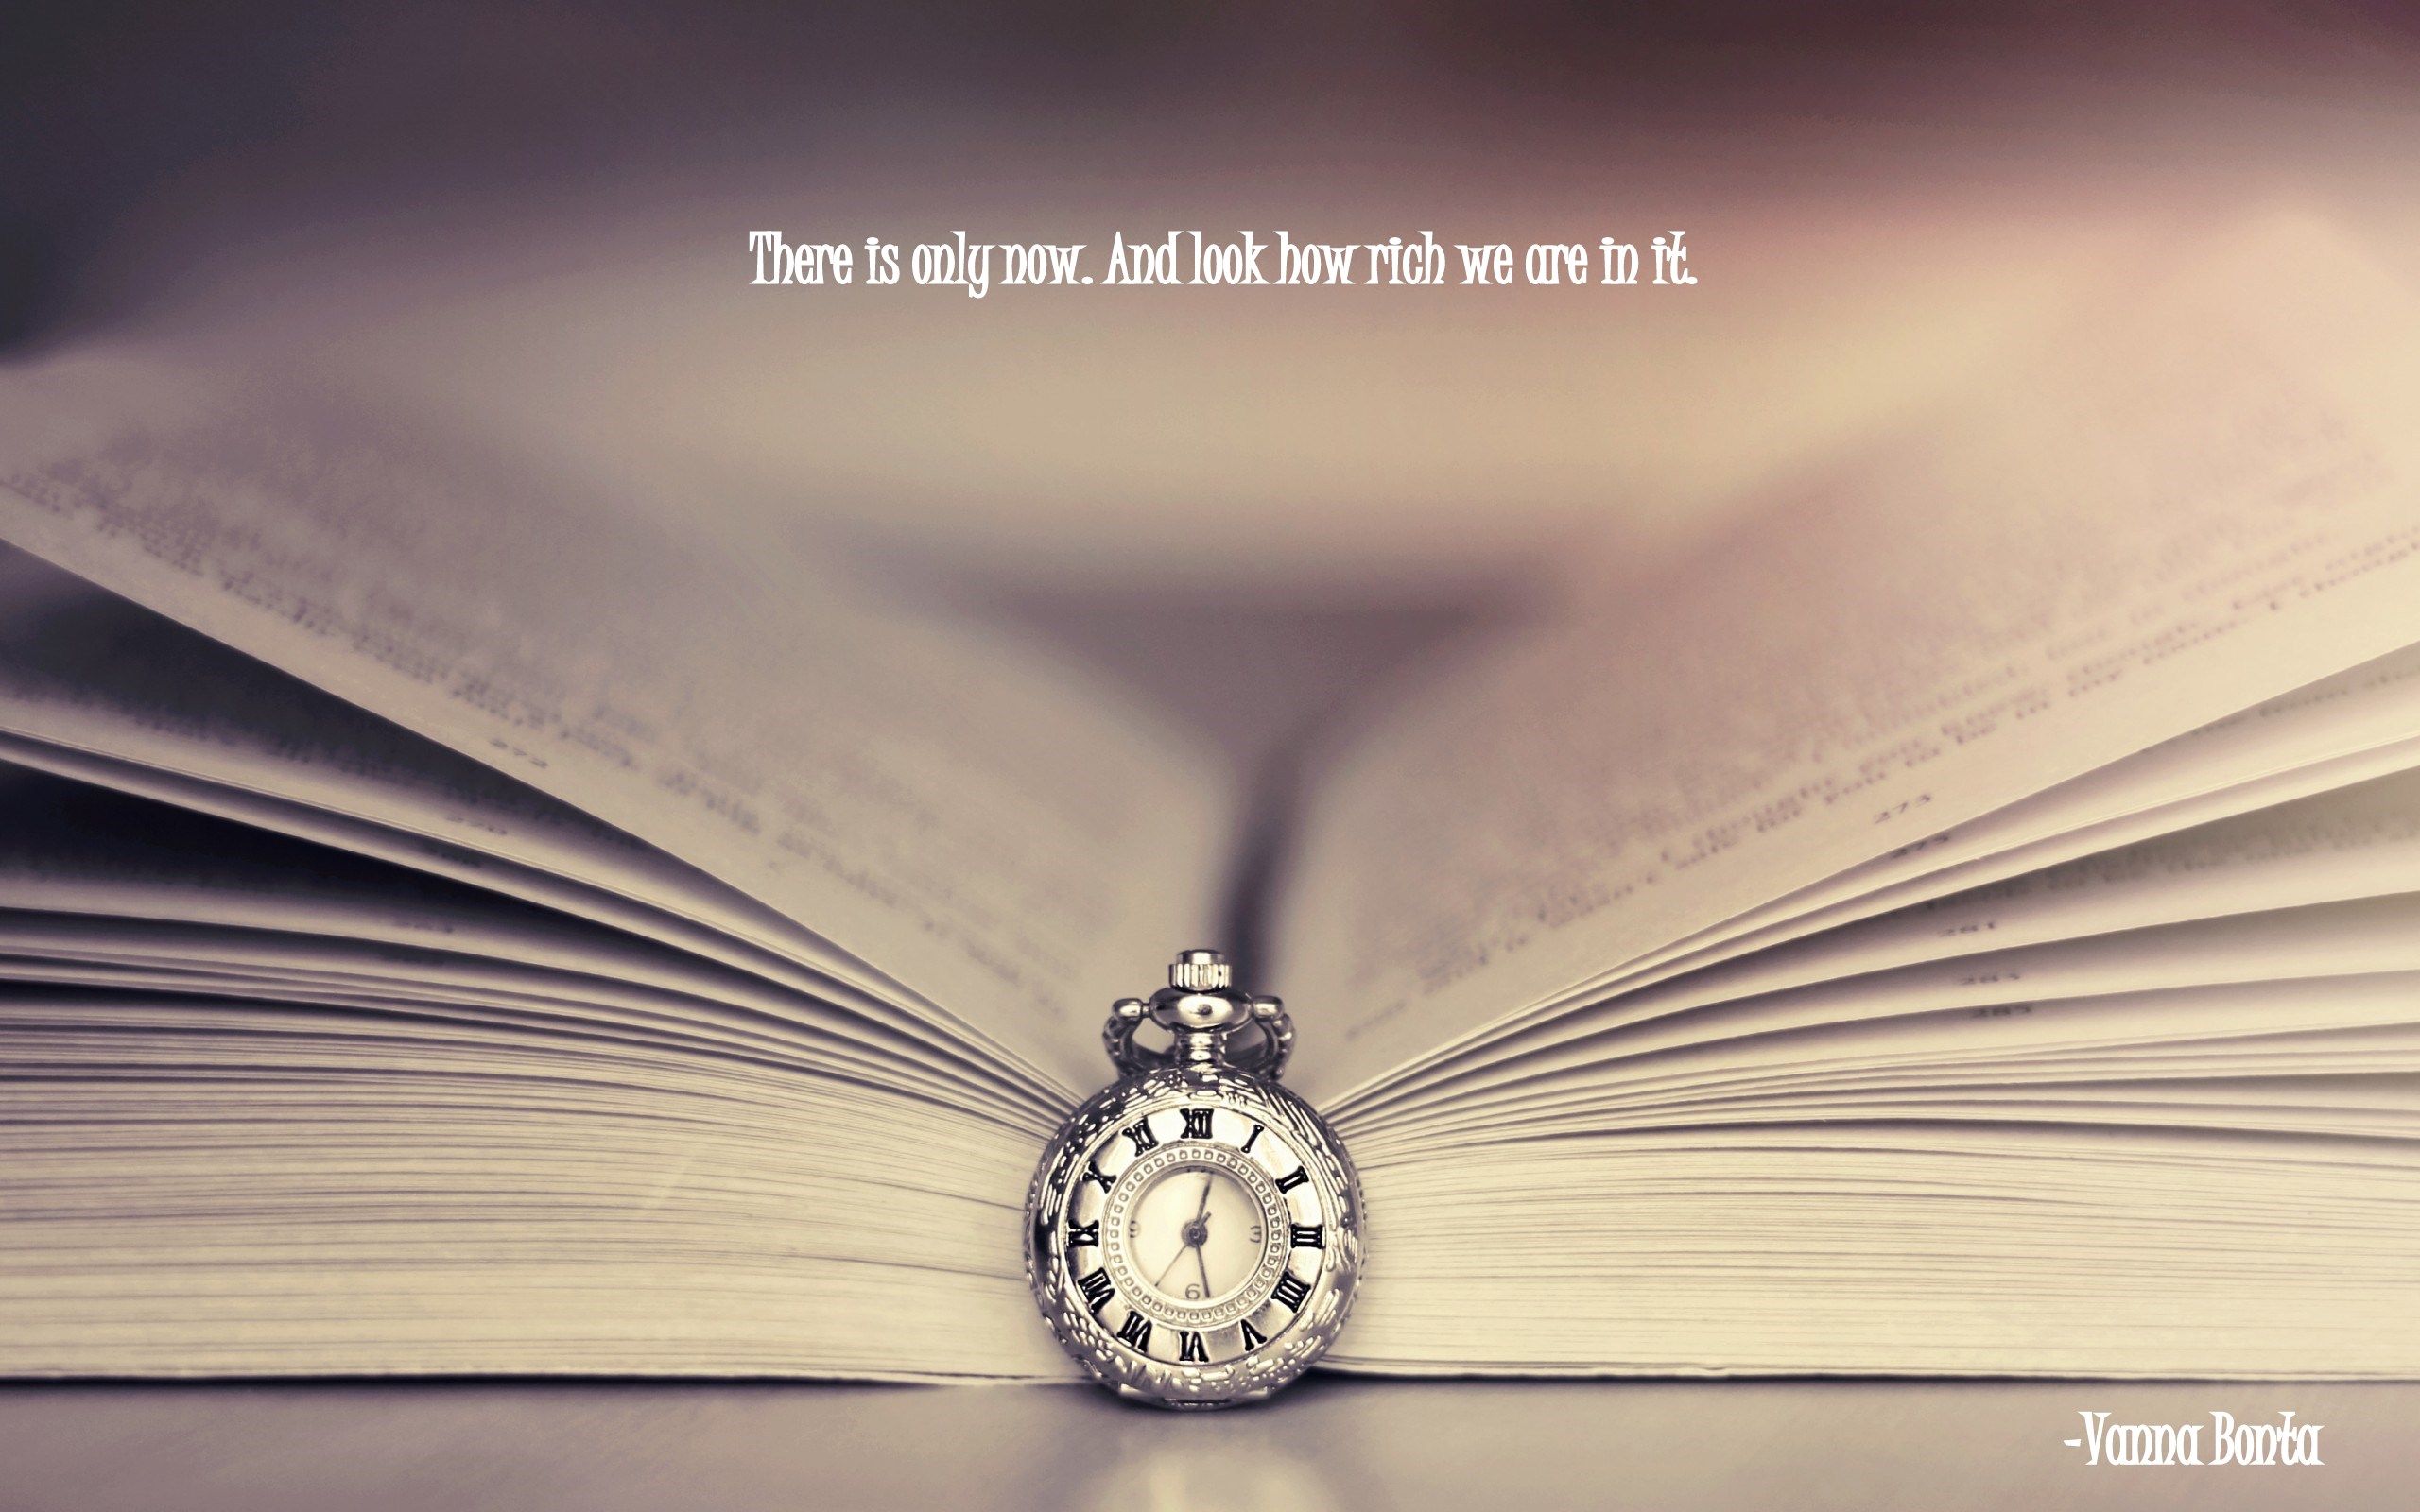 Time Quotes Wallpapers - Wallpaper Cave